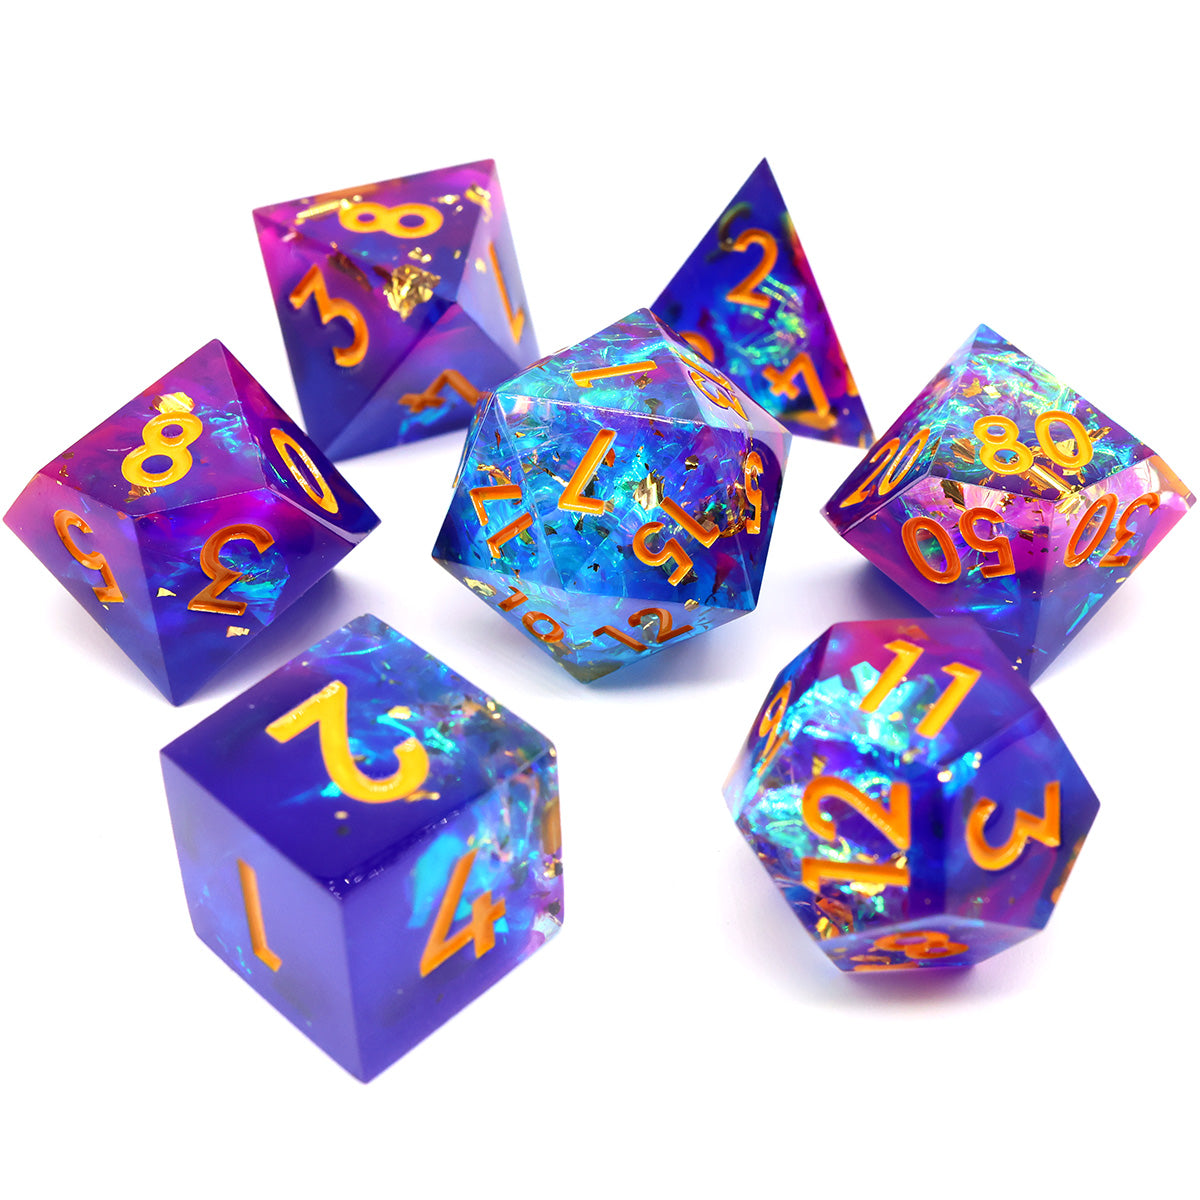 Sharp edge DND, TTRPG dice sets for role playing games, dice goblin and critical critter collectors